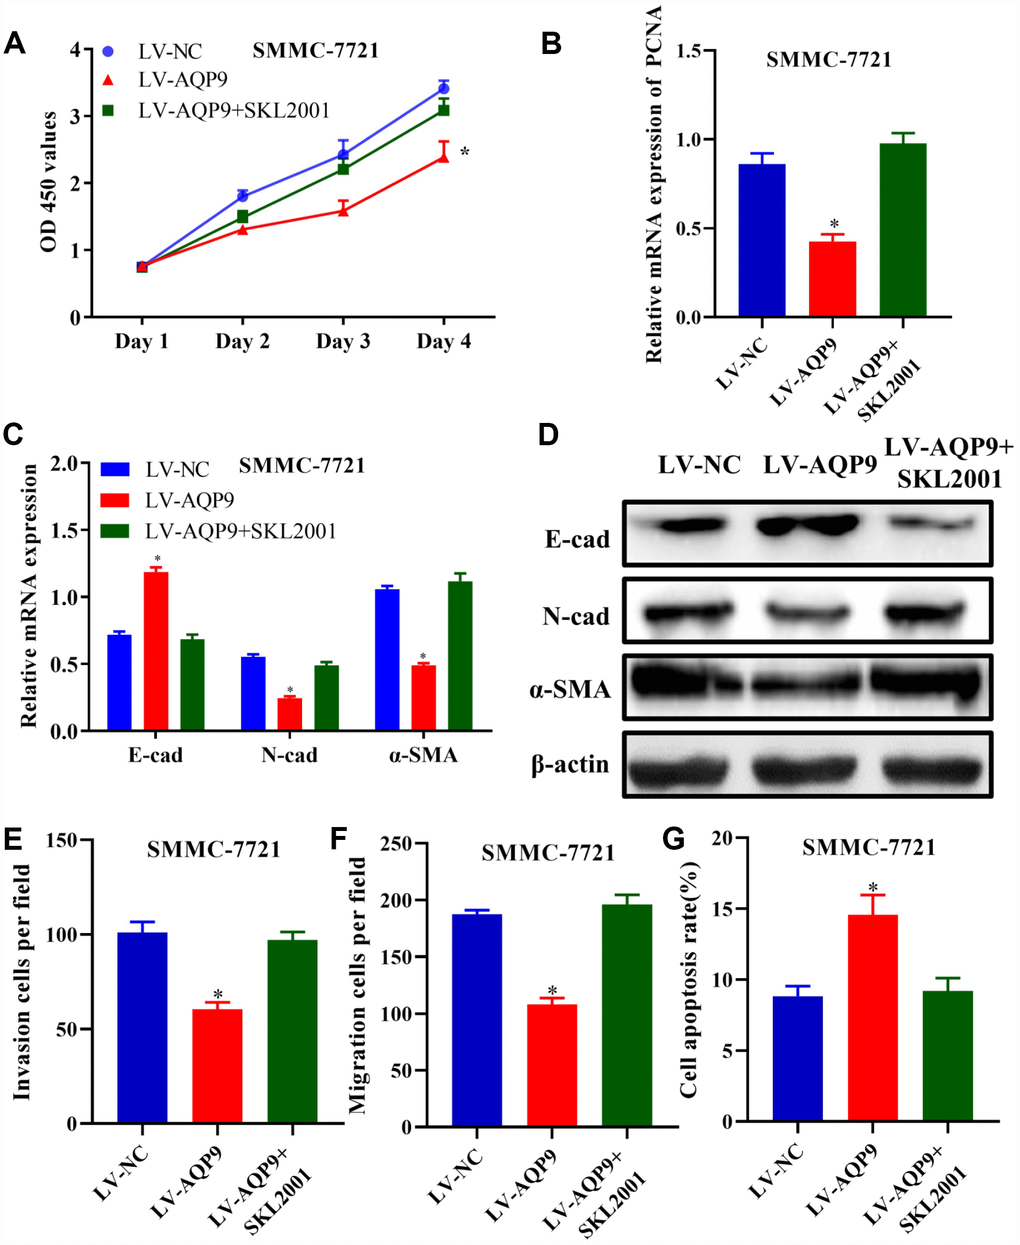 Activation of Wnt/β-catenin pathway reversed the effects of AQP9 on HCC progression. (A) The proliferation of SMMC-7721 cells transfected with LV-NC, LV-AQP9 or LV-AQP9+SKL2001 was determined. (B–D) The expression levels of PCNA, E-cad, N-cad and α-SMA in transfected HCC cells were examined using RT-qPCR. (E and F) The invasive and migration activities of SMMC-7721 cells were evaluated following the treatment with LV-NC, LV-AQP9 or LV-AQP9+SKL2001 (magnificationx100). (G) The apoptosis rate of transfected HCC cells was assessed by flow cytometry. The results were represented as mean ± SD. P